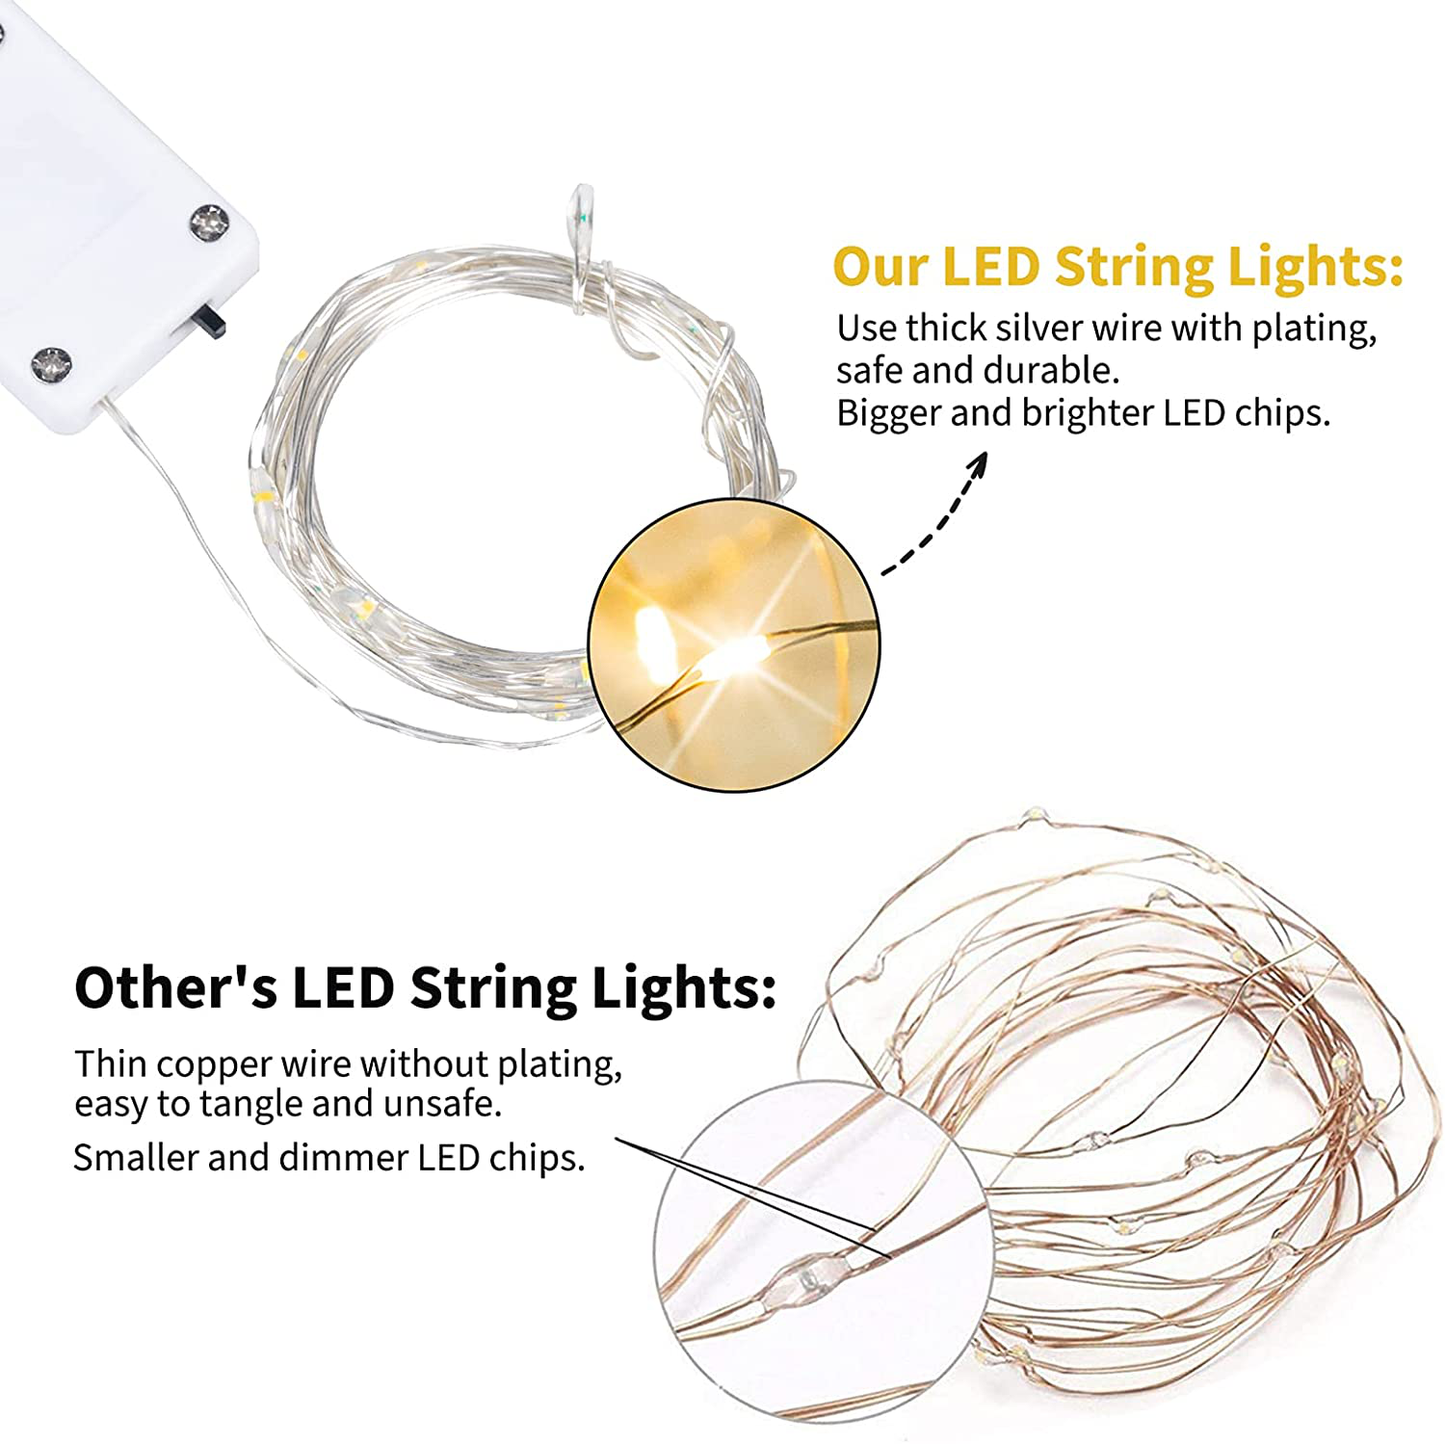 16 Pack Fairy Lights Battery Operated 7 Feet 20 Led Mini Firefly String Lights with Flexible Silver Wire for Wedding Centerpieces Mason Jar Craft Christmas Garlands Party Decorations, Warm